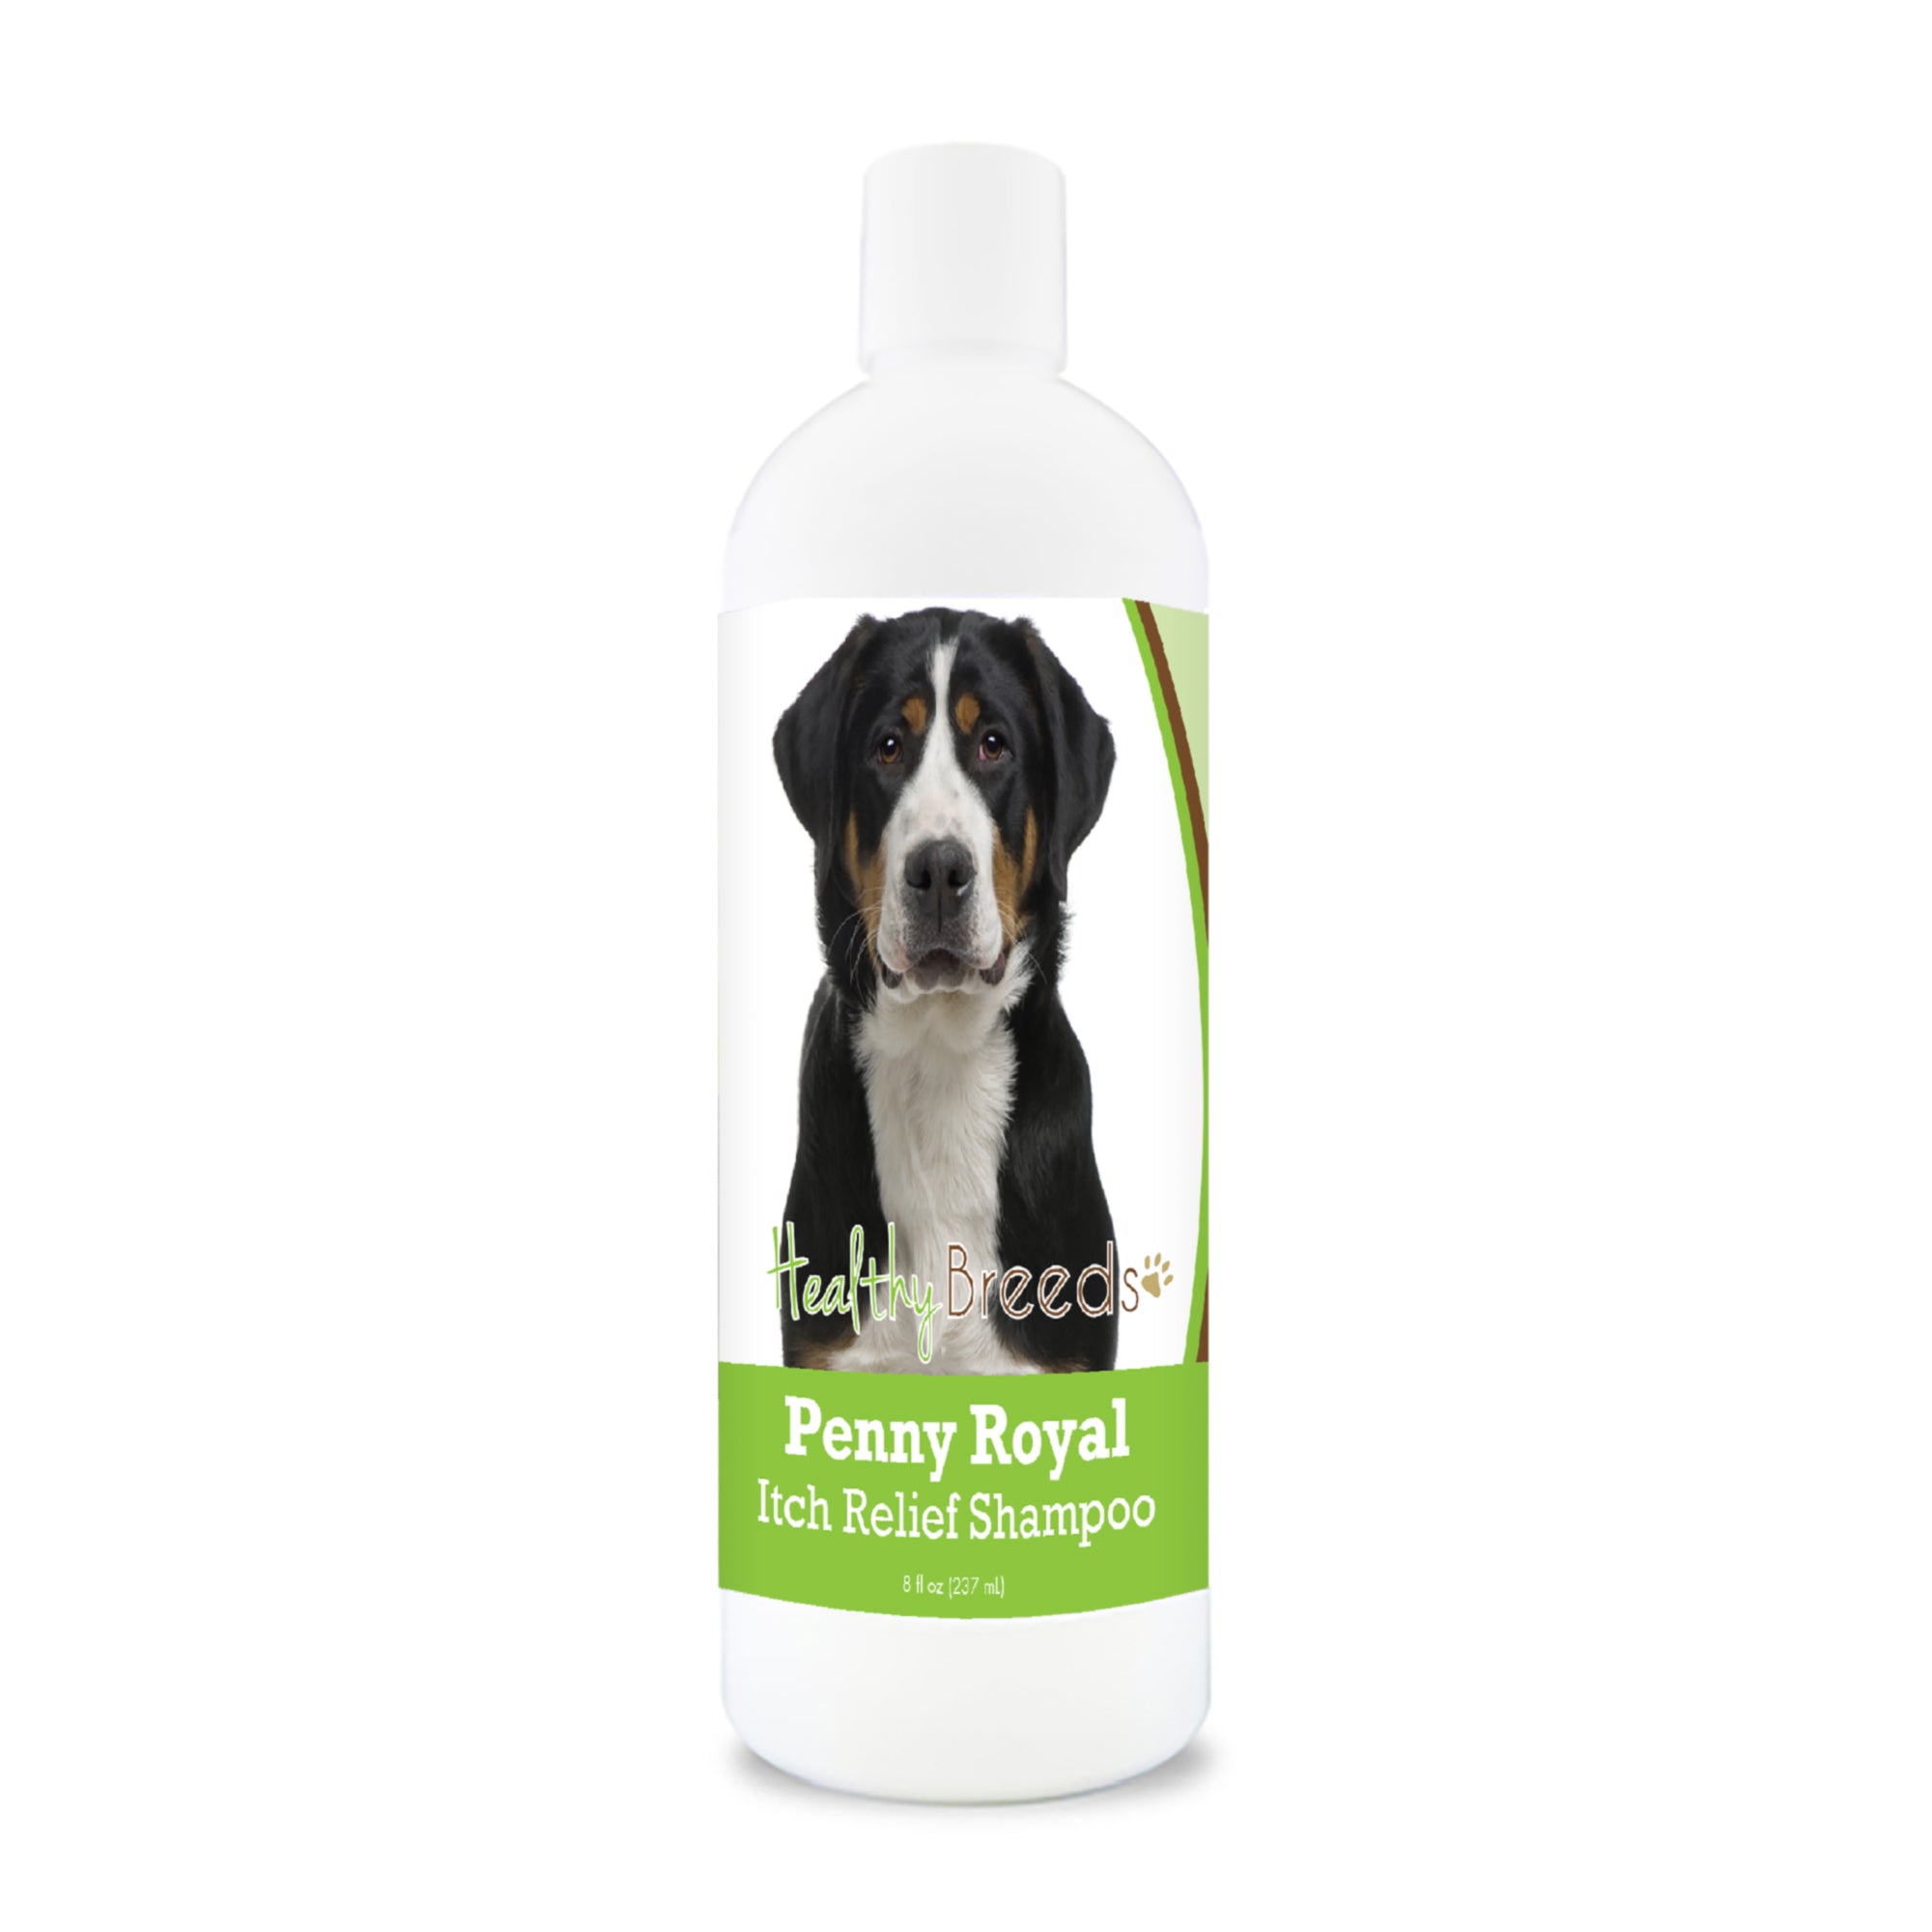 Greater Swiss Mountain Dog Penny Royal Itch Relief Shampoo 8 oz